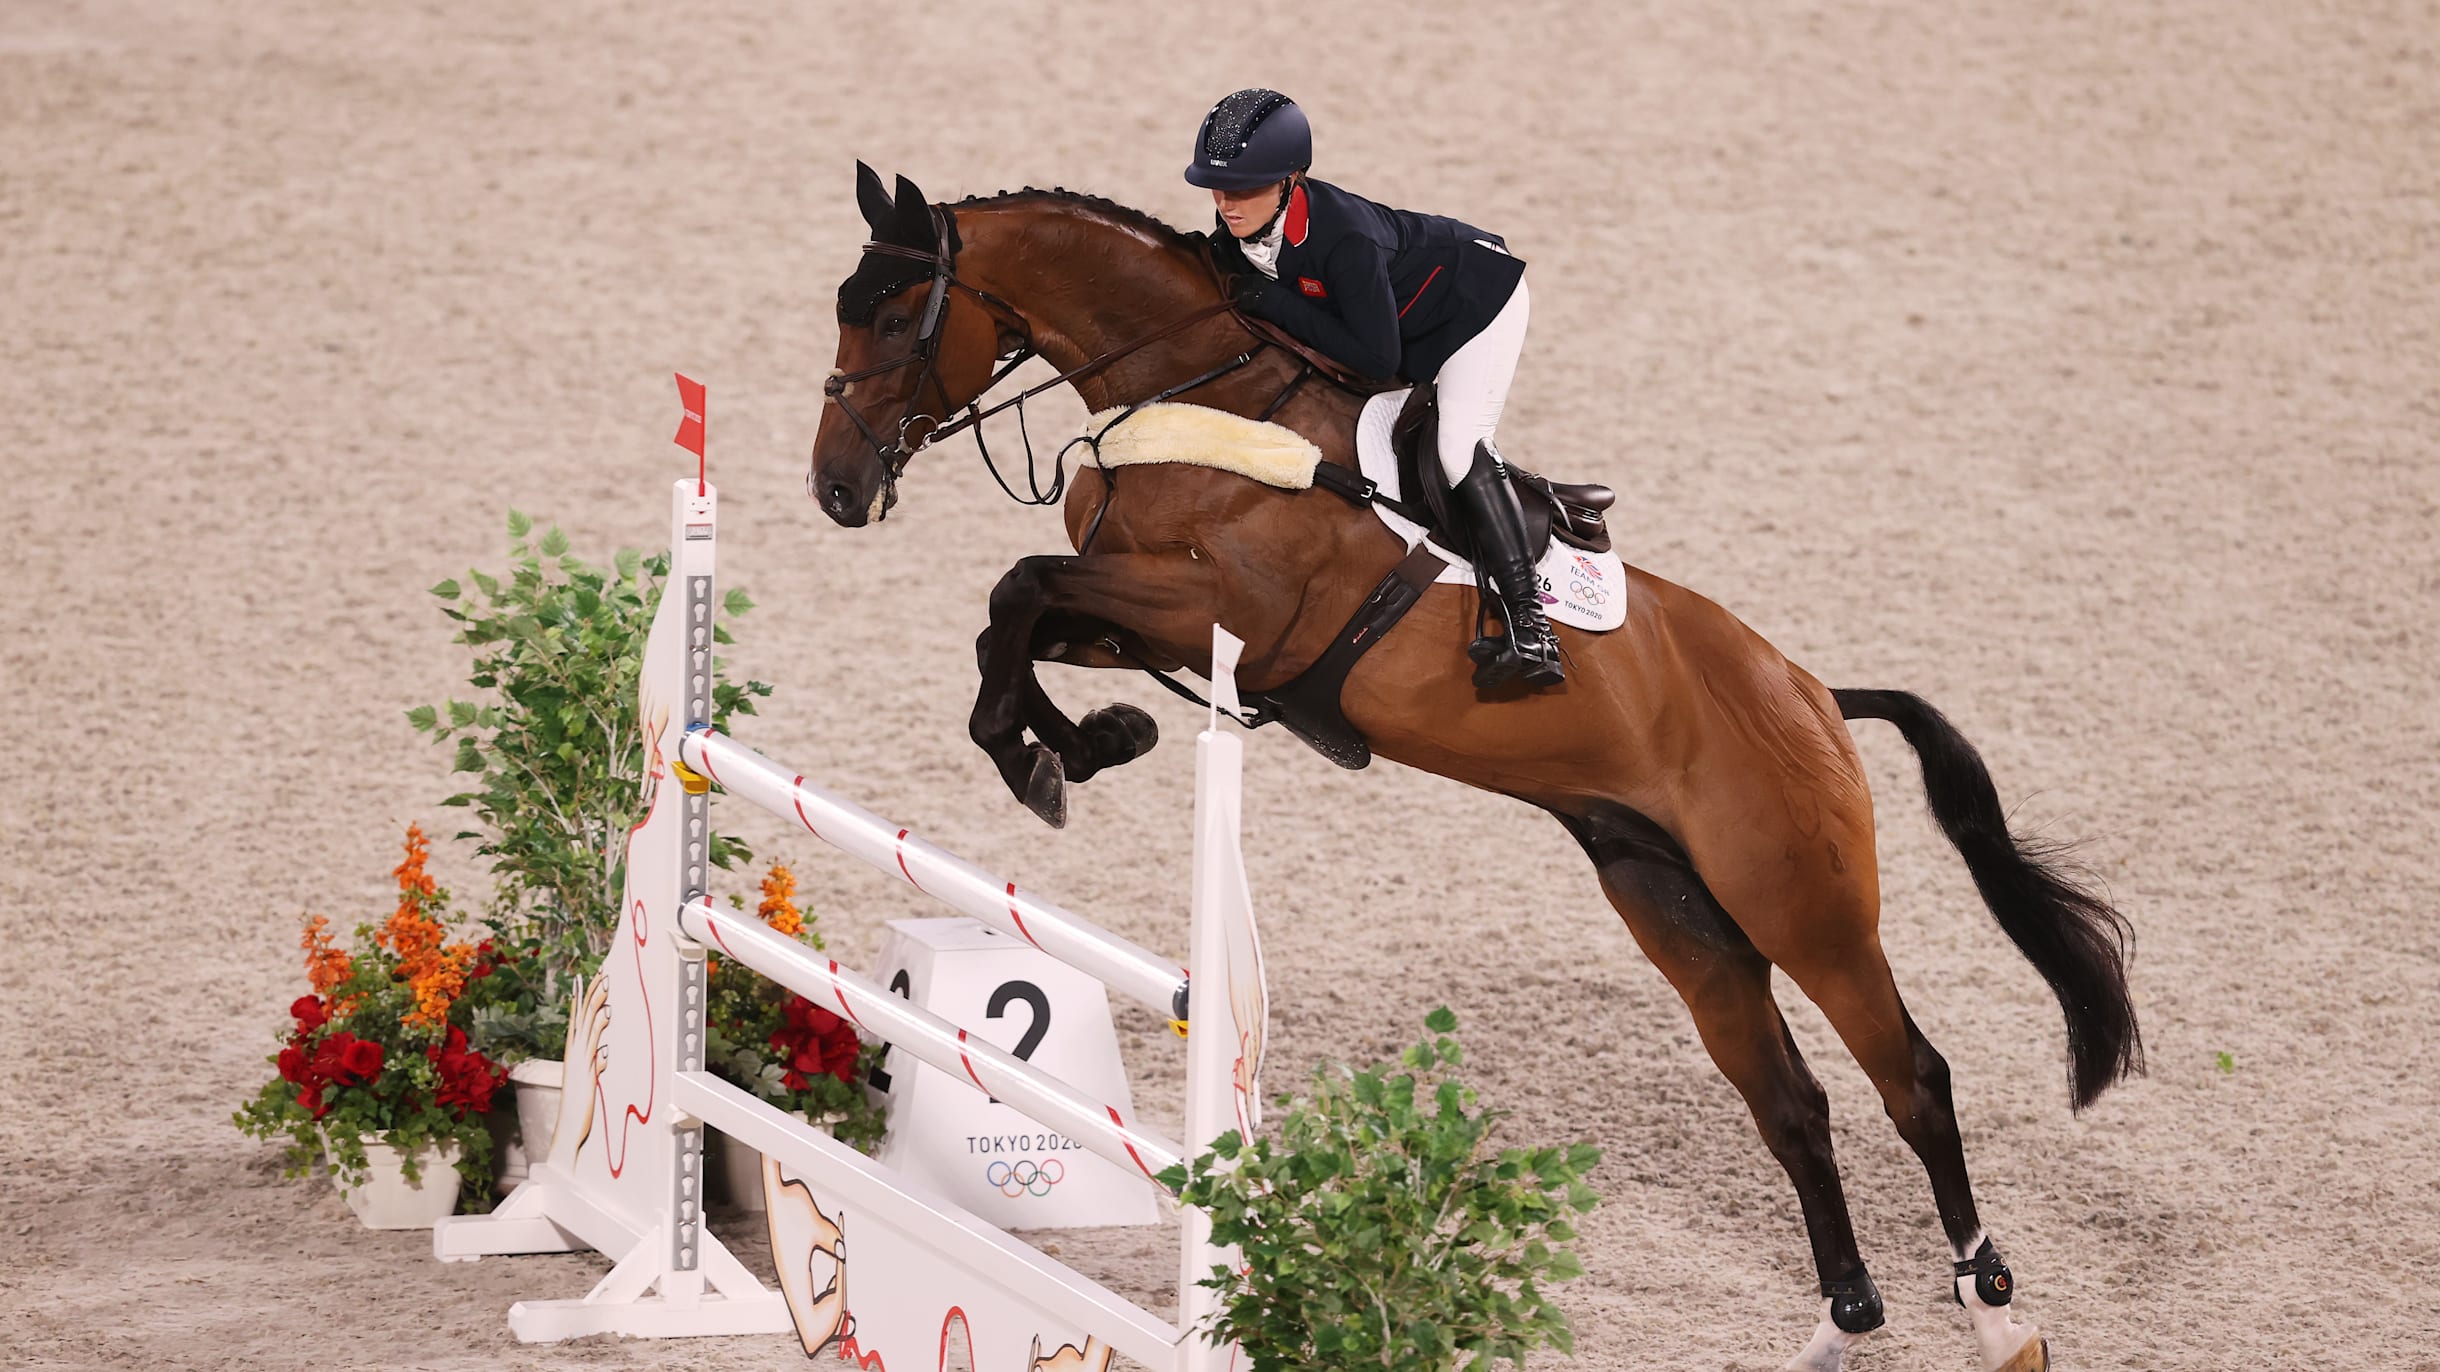 From deaths door to Olympic gold how British equestrian Laura Collett triumphed against the odds